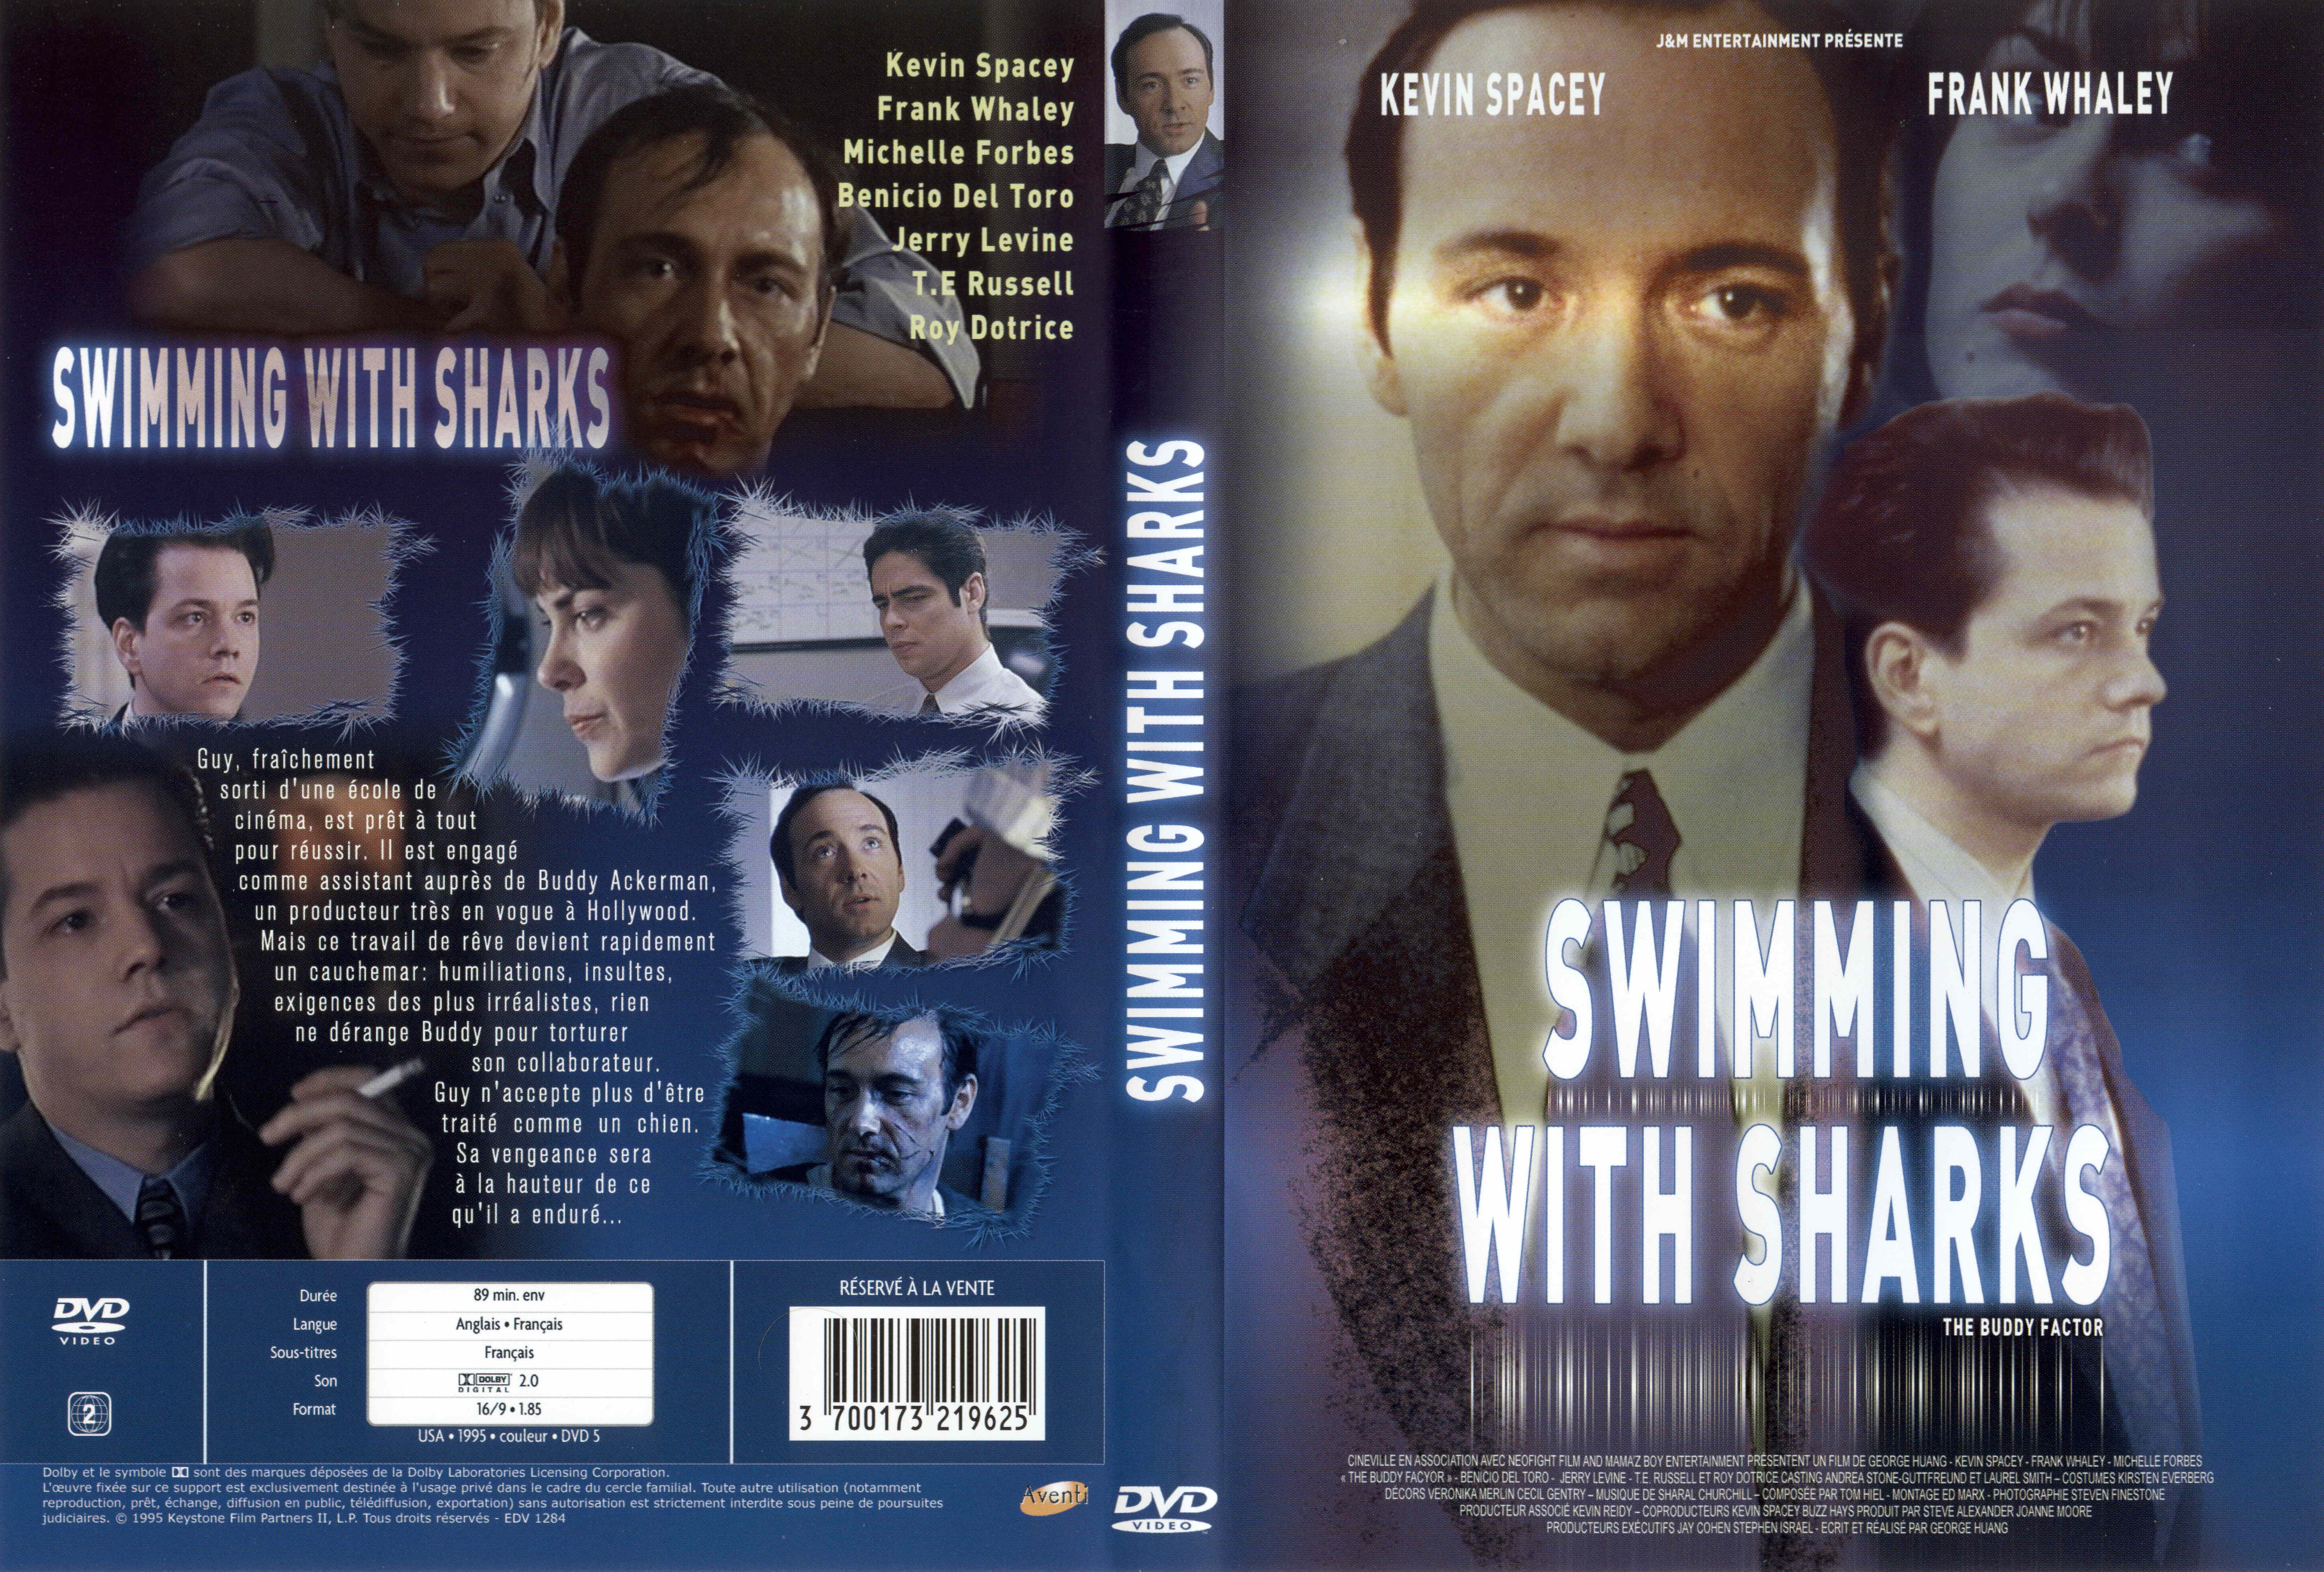 Jaquette DVD Swimming with sharks v2